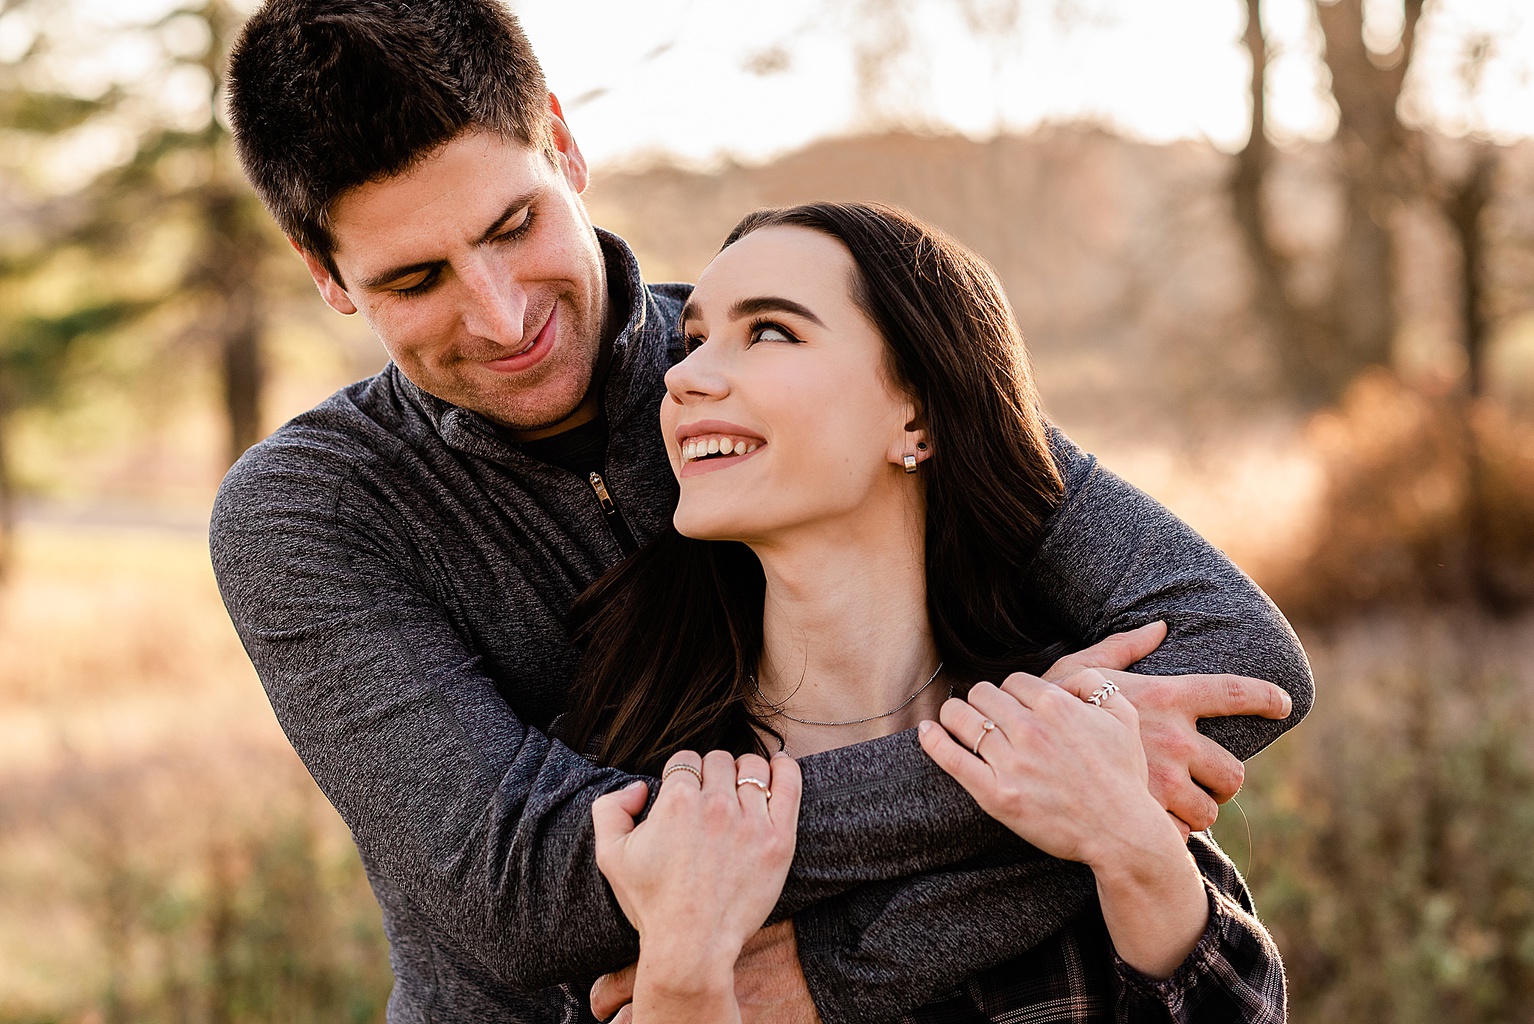 engagement photos from Allie & Co. photography, East Lansing, Michigan photographers